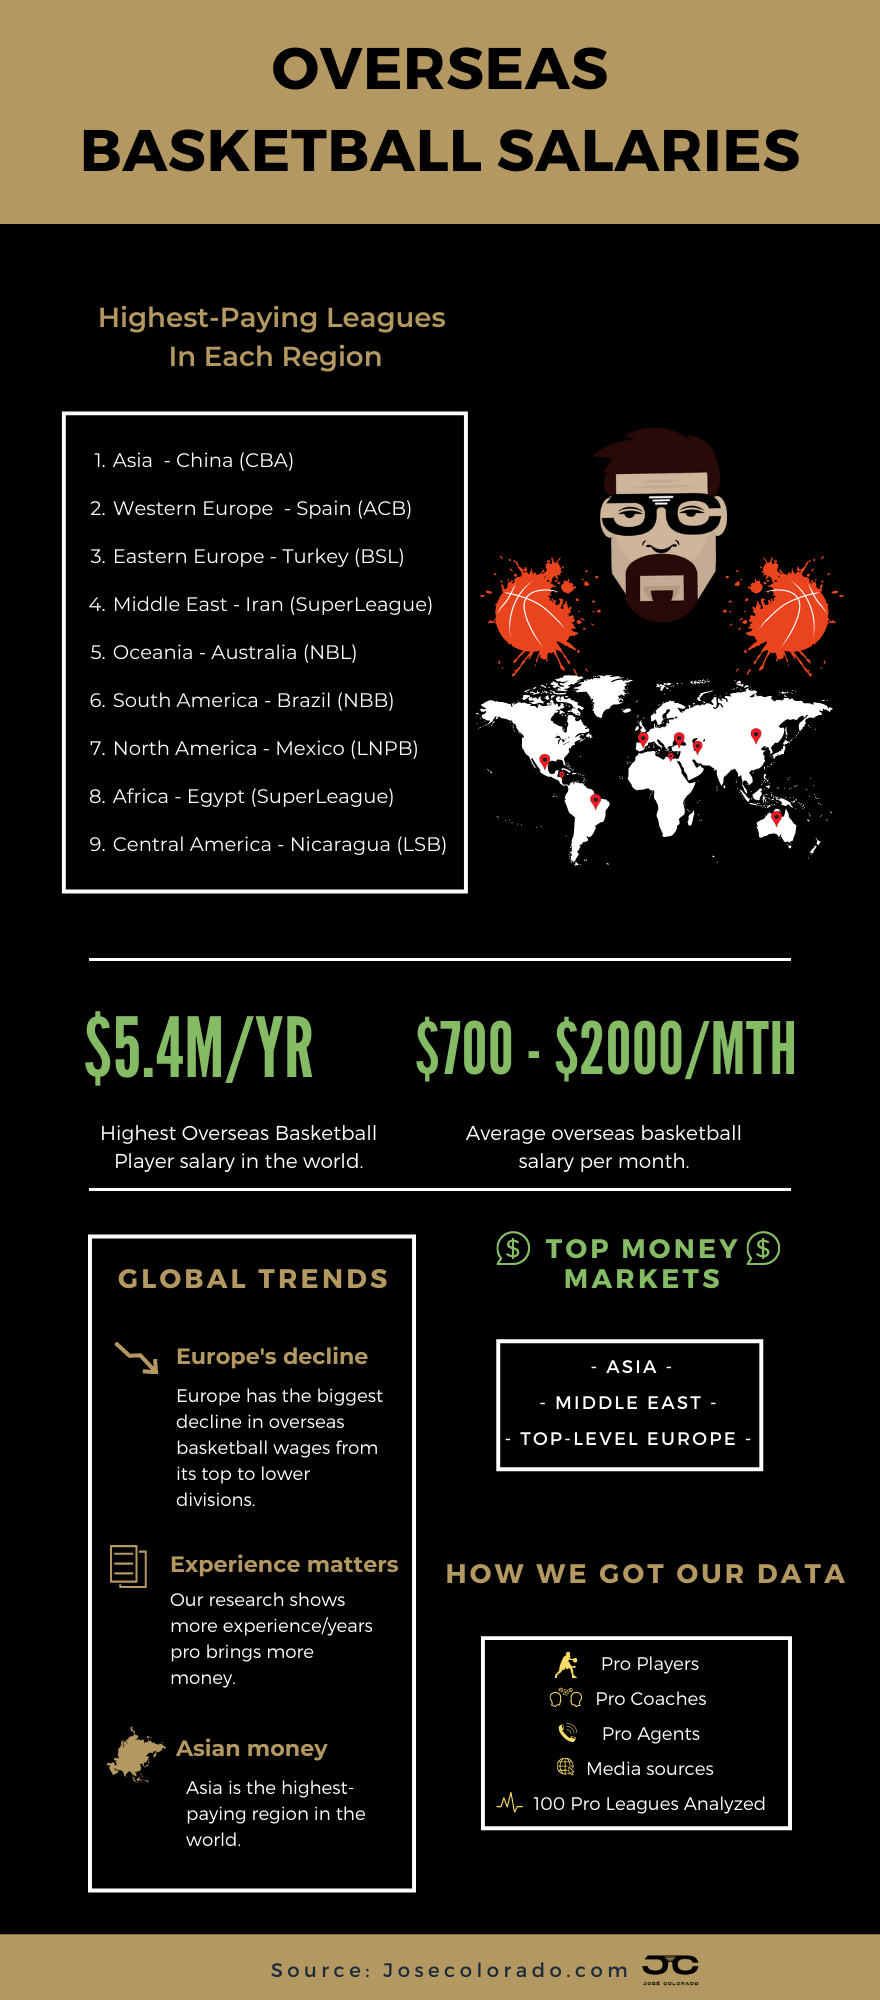 Overseas basketball salaries in the world by country vary greatly.